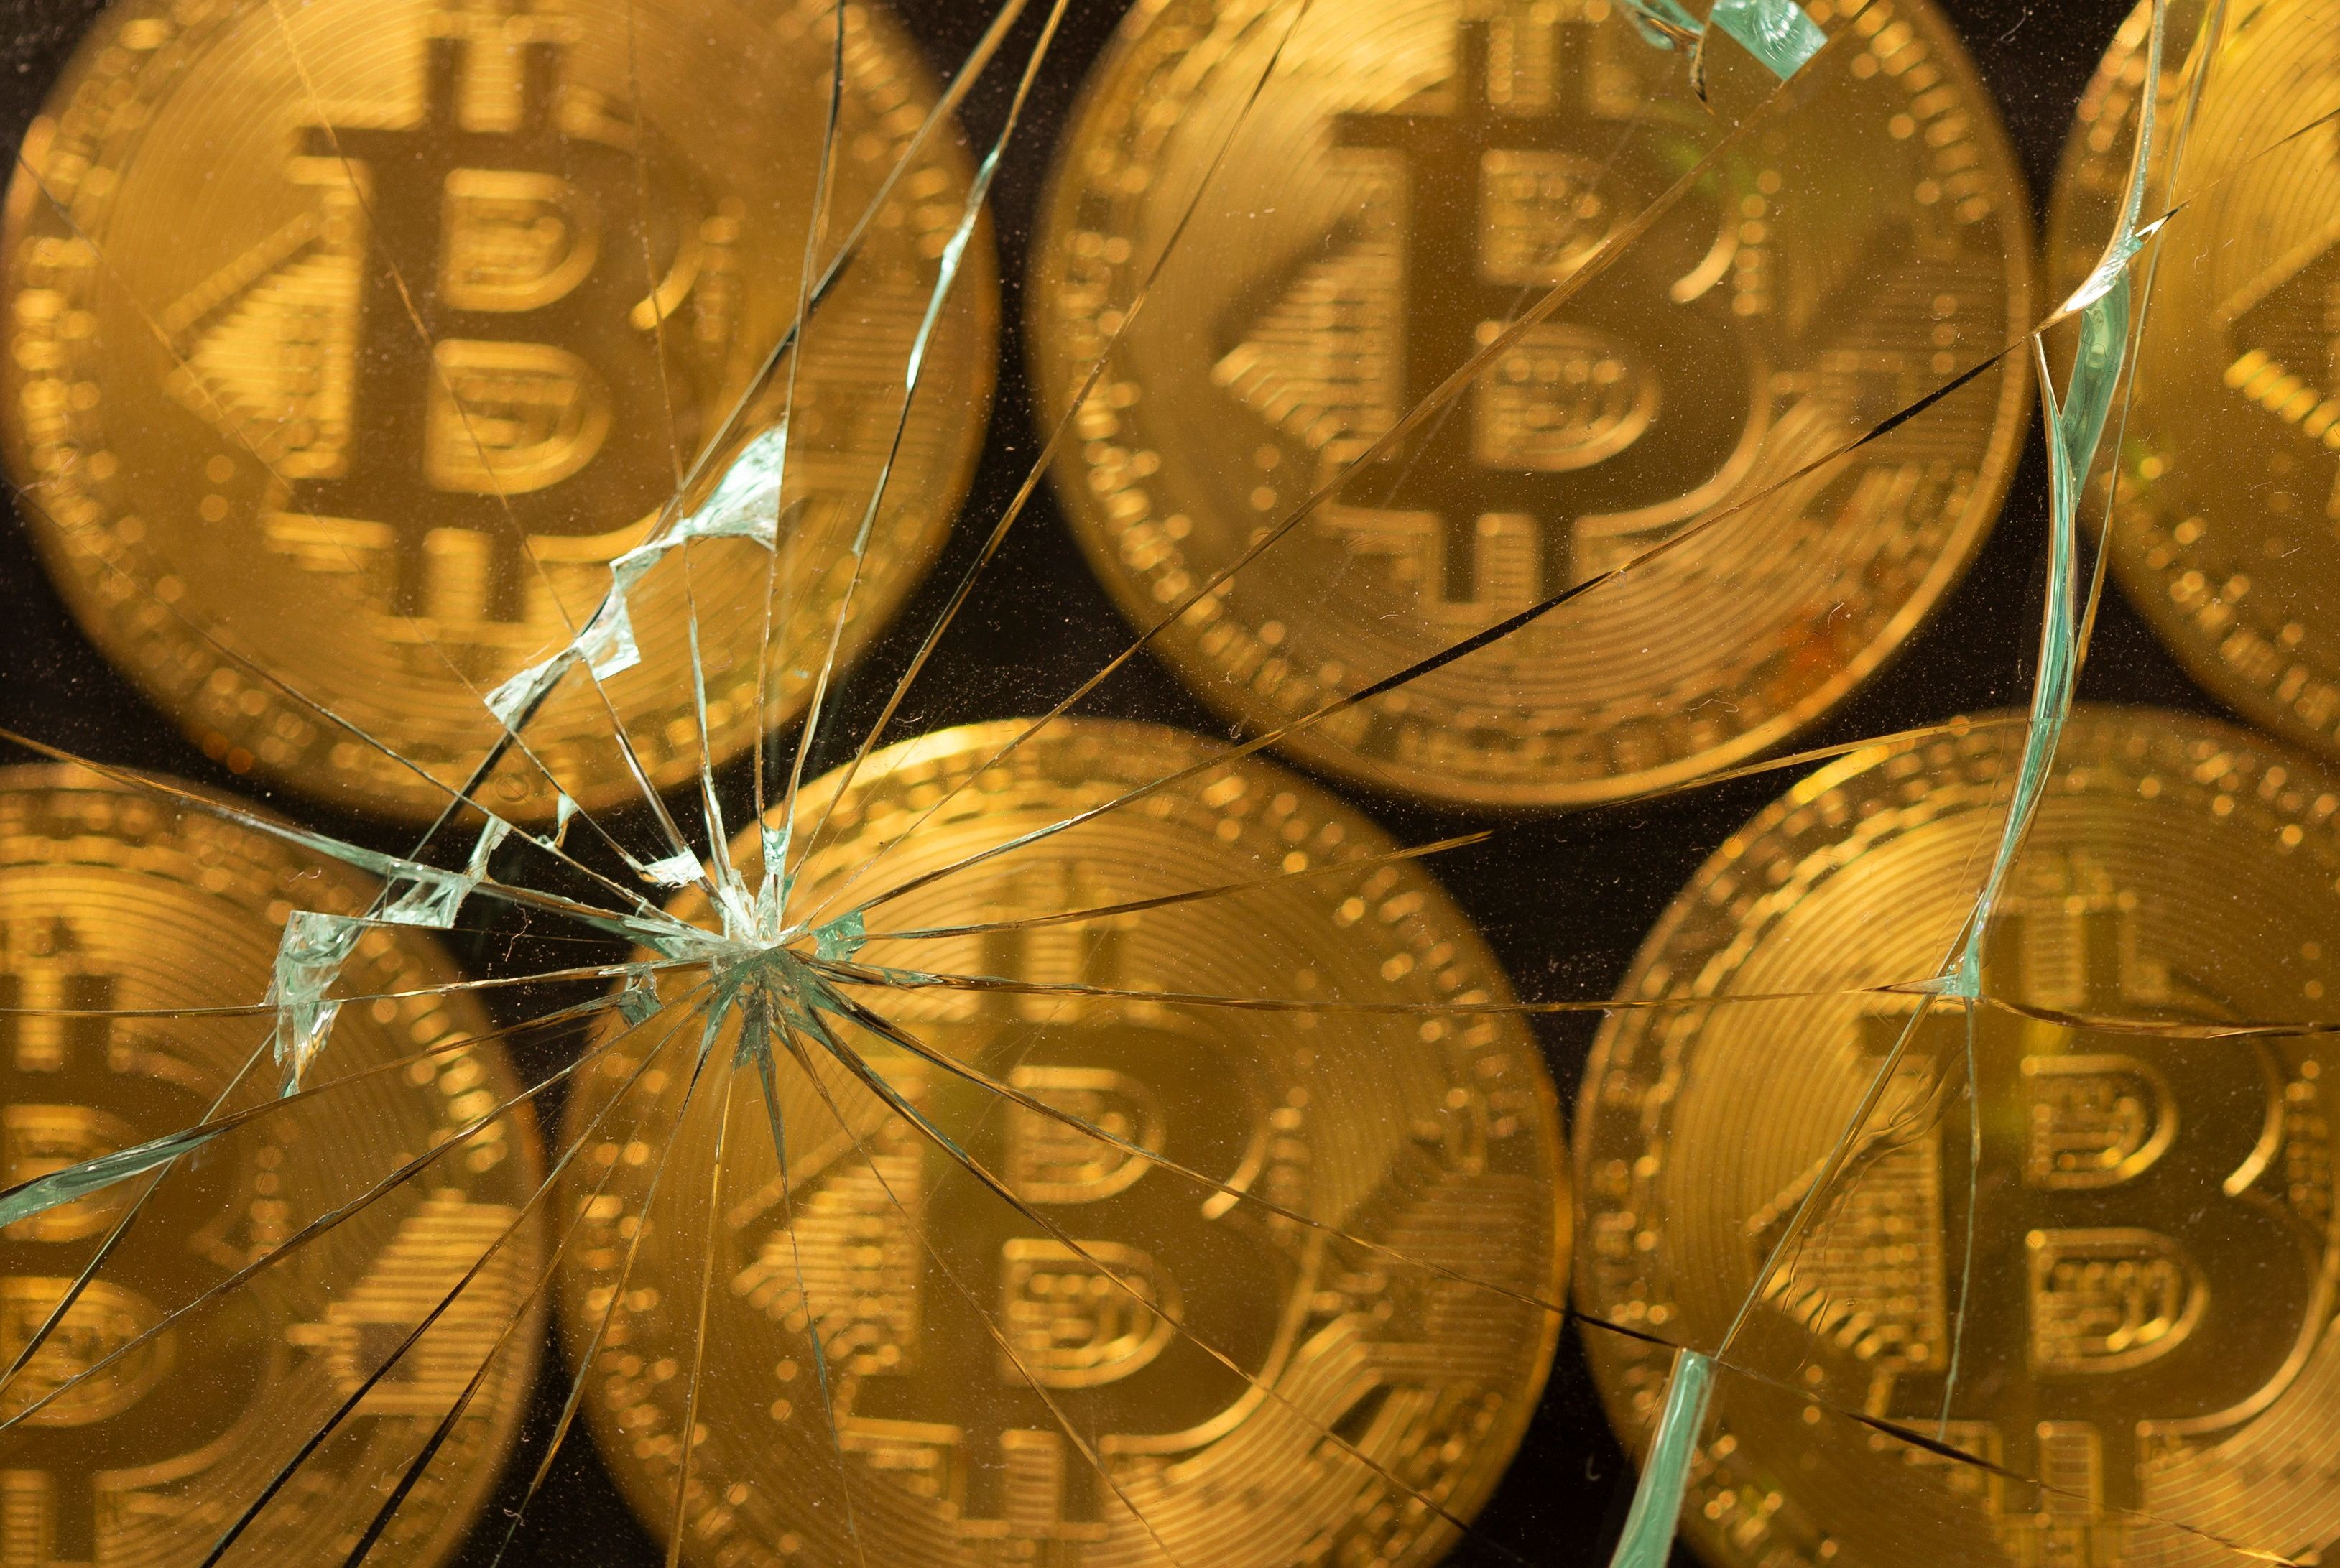 Representations of virtual currency bitcoin are seen through broken glass in this illustration taken